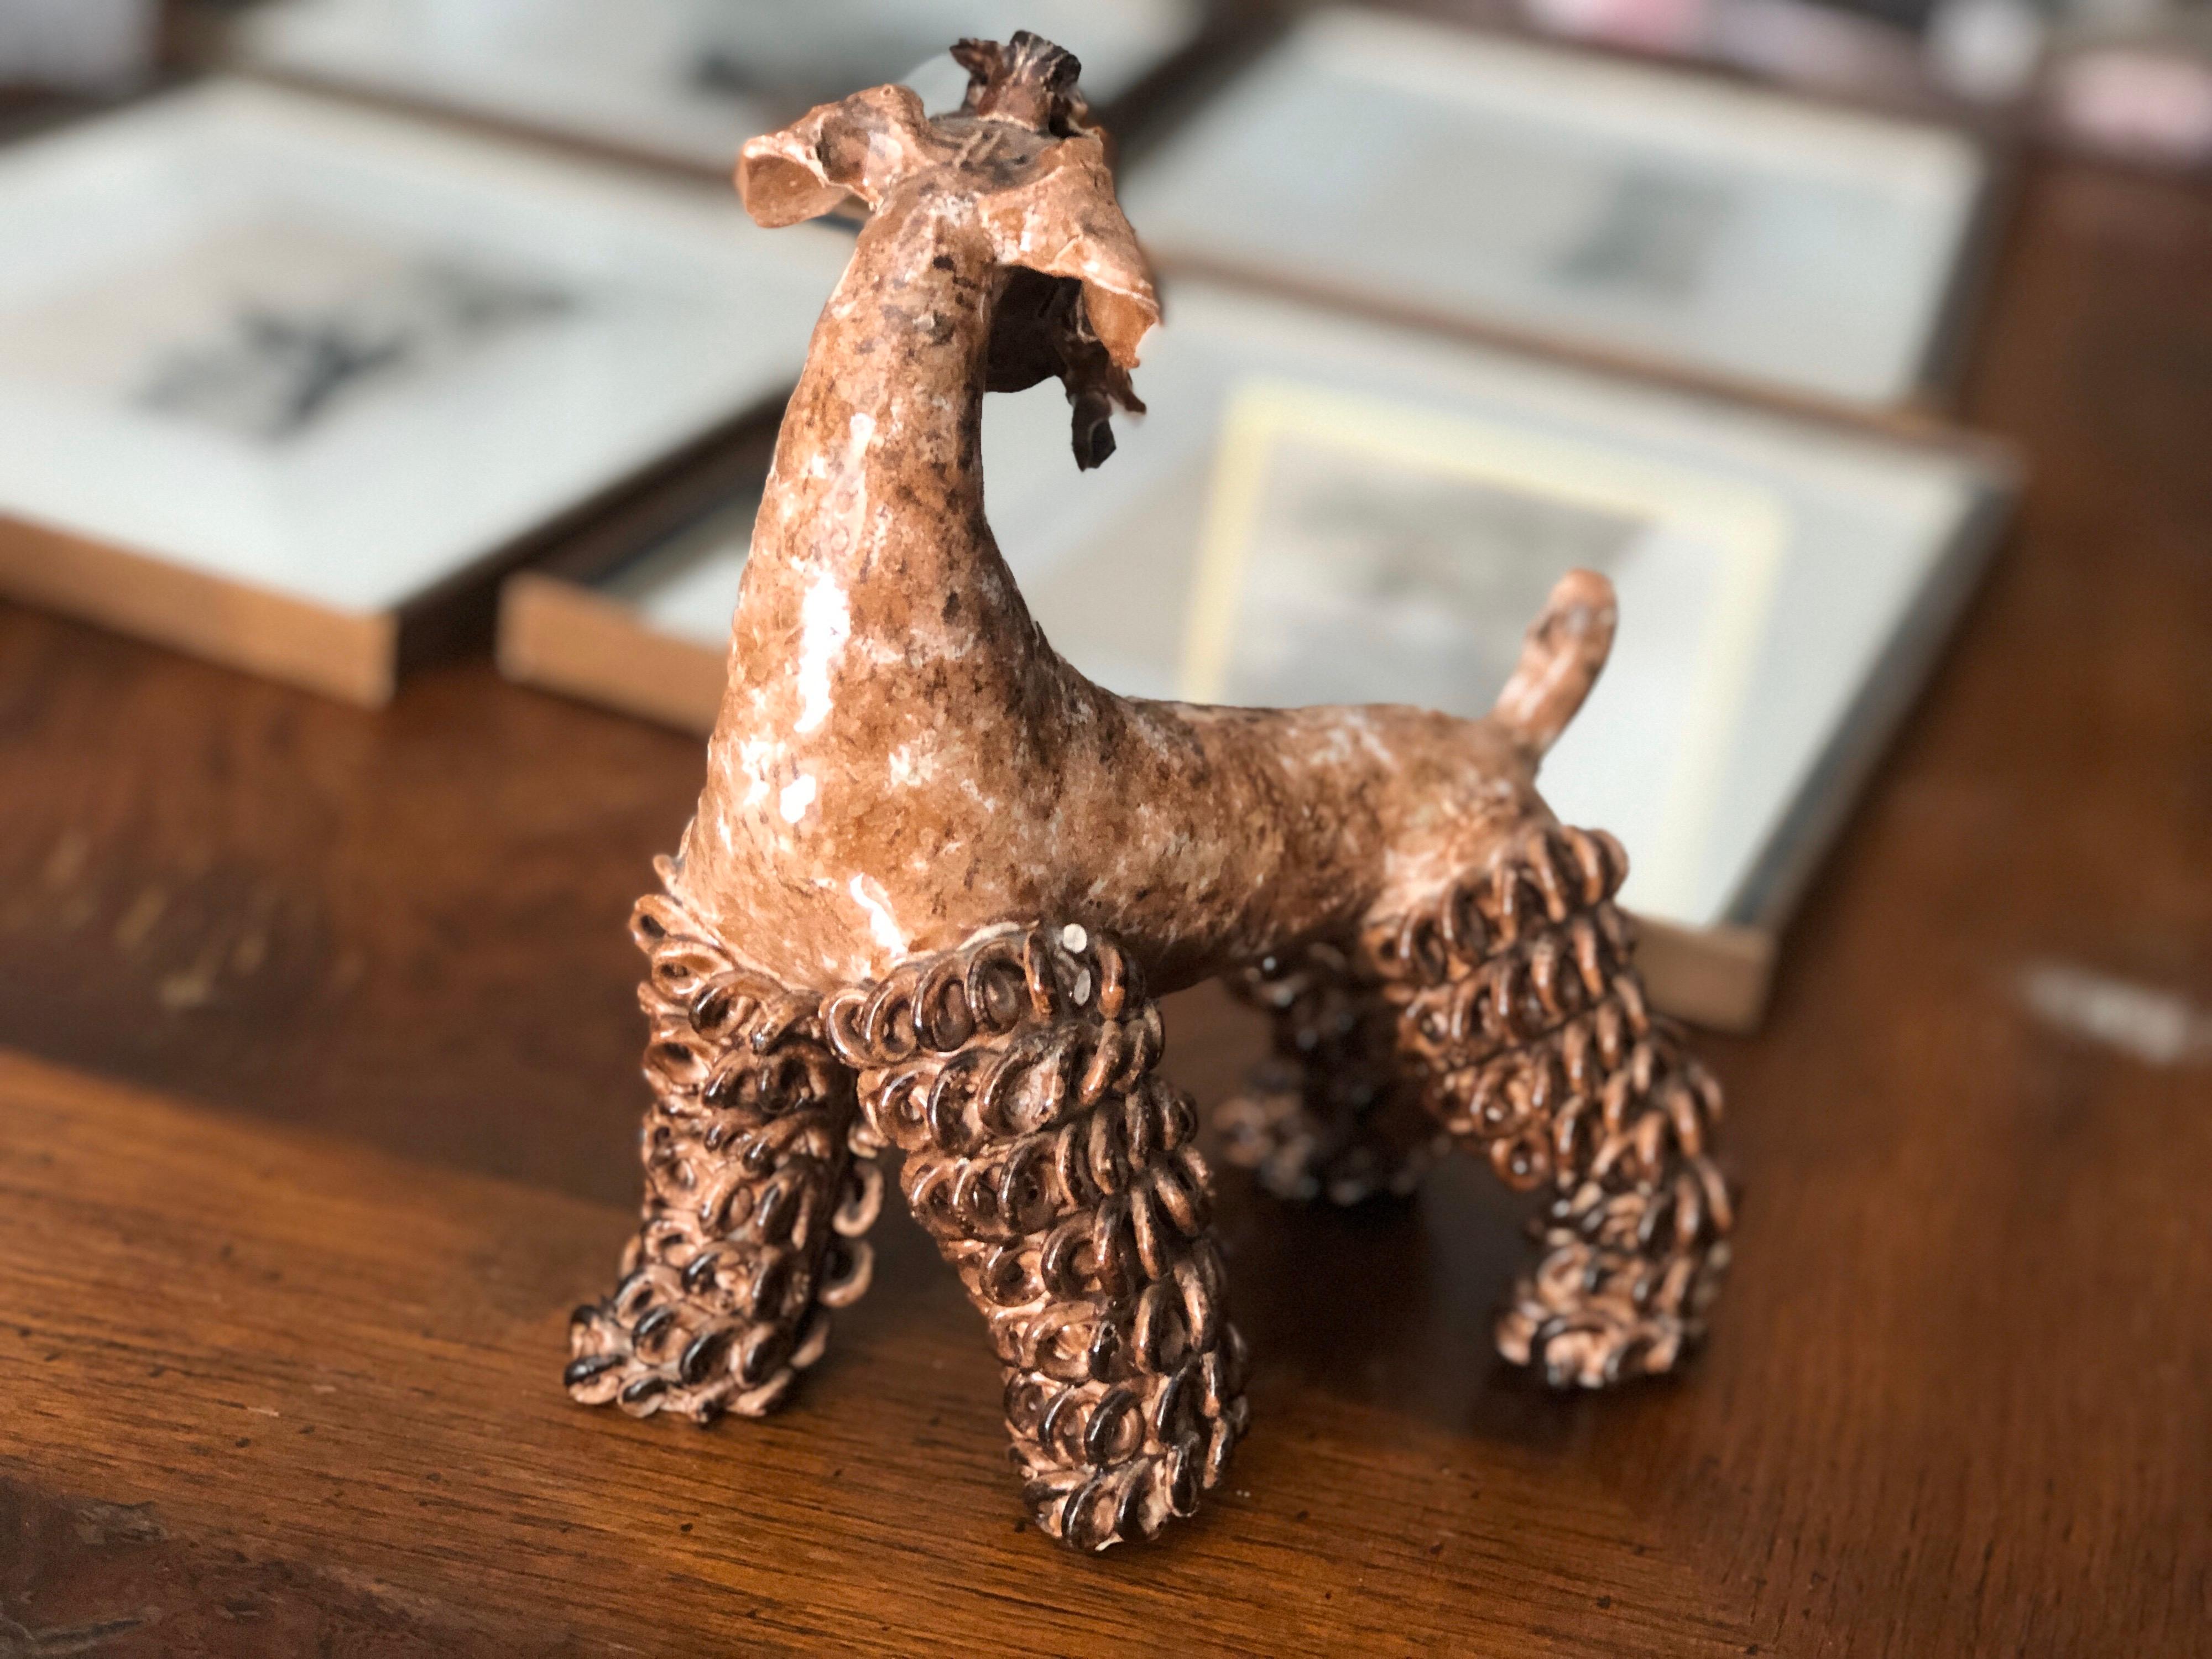 20th century French ceramic sculpture of Zwergschnauzer made by Prunet.
Very vivid and elegant posture in light brown color.
France, circa 1960.